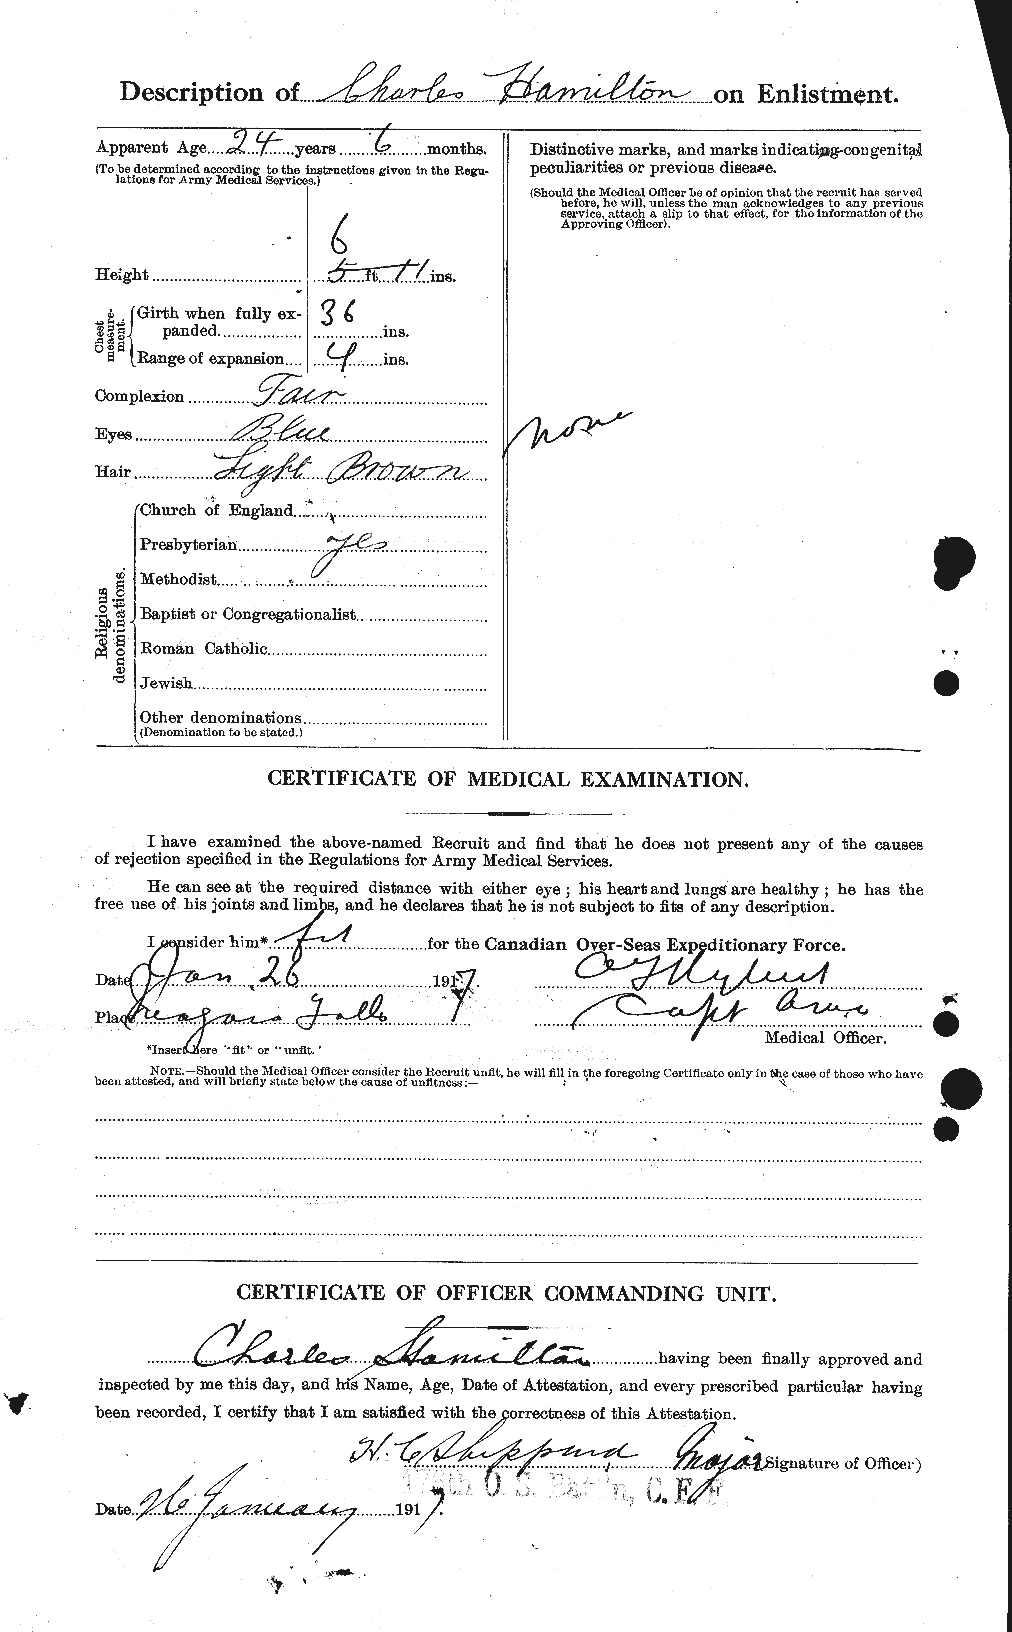 Personnel Records of the First World War - CEF 375301b